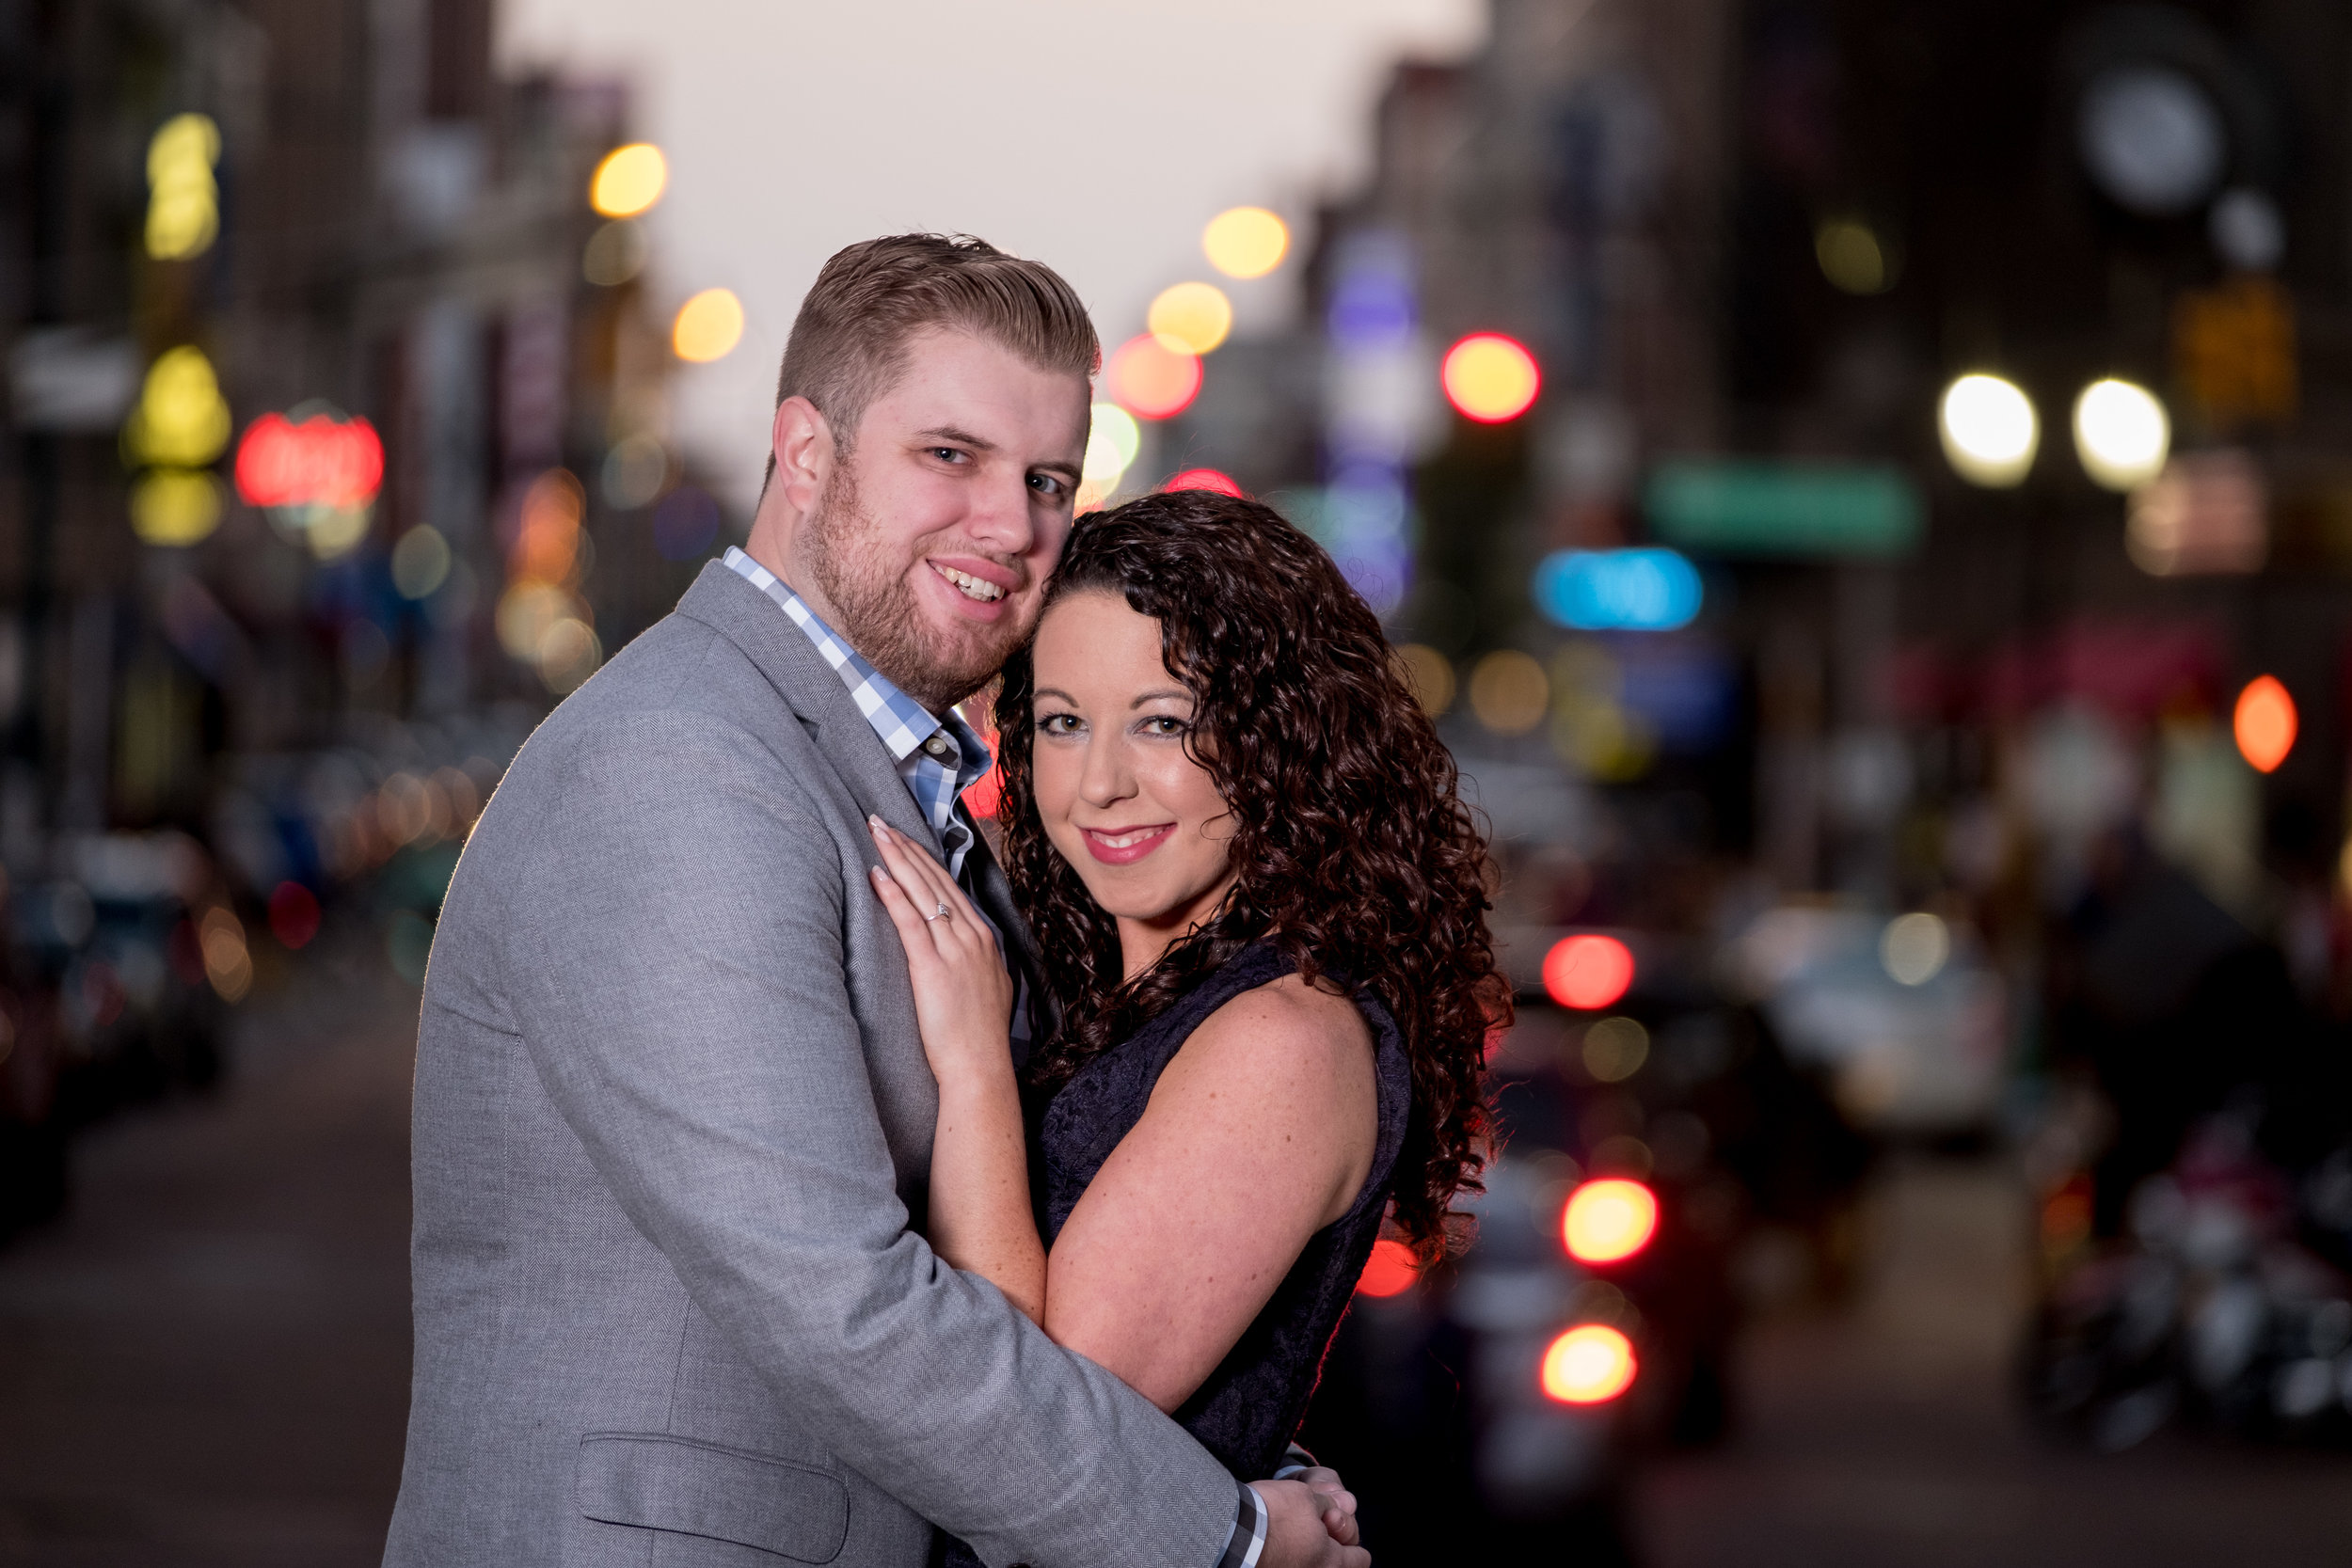 Downtown-Indianapolis-night-engagement-pictures-05.jpg